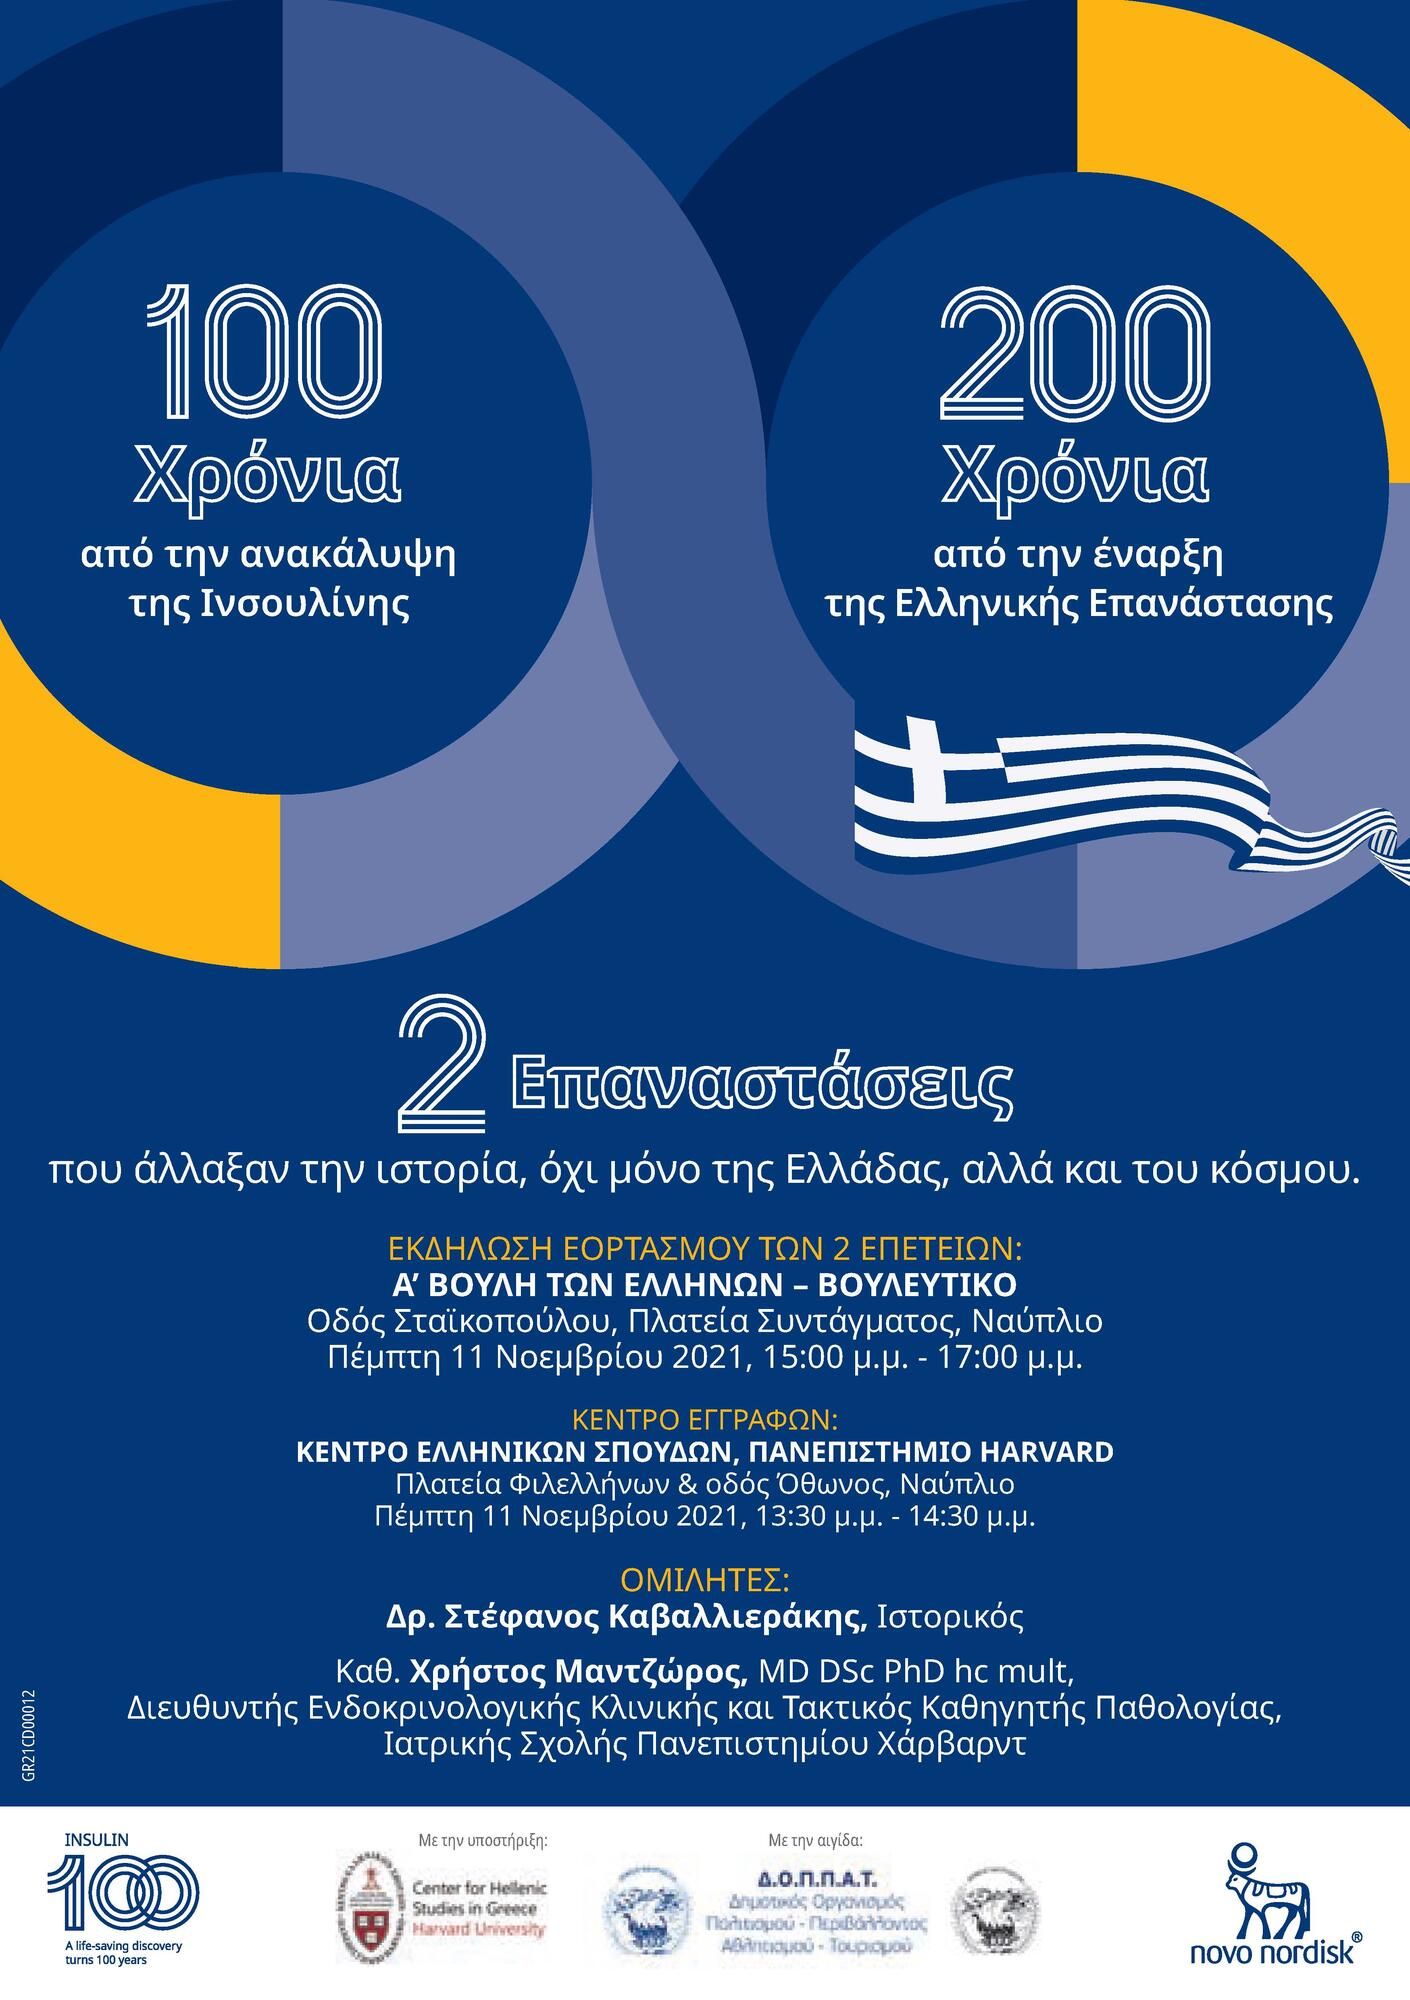 Event poster for the joint celebration for the anniversaries of 100 years since the discovery of insulin and 200 years since the Greek Revolution